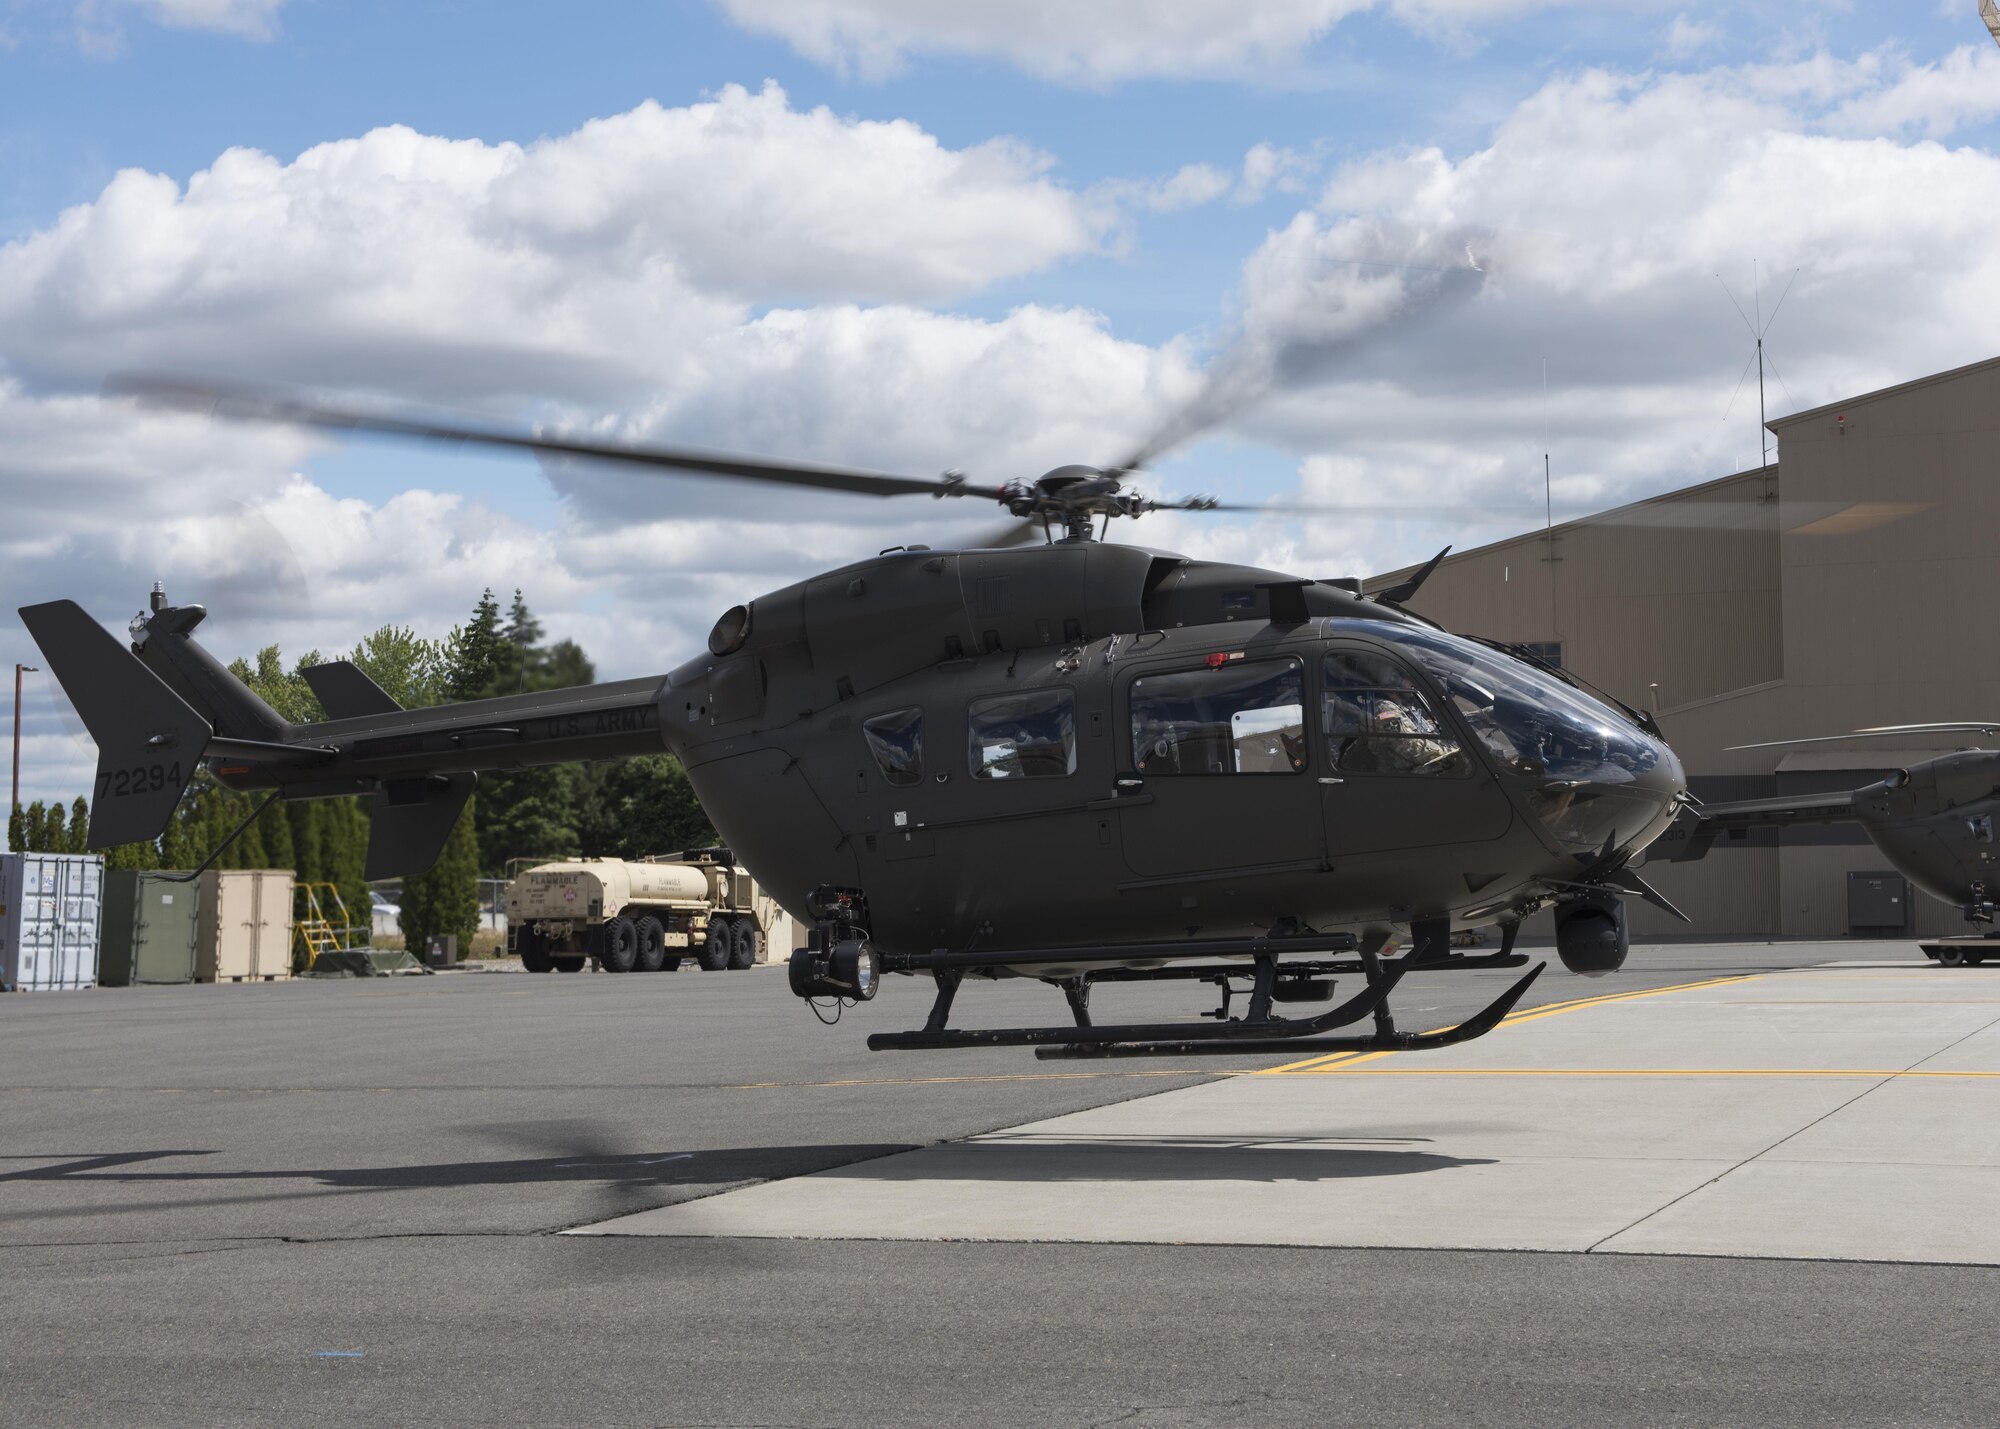 A UH-72 Lakota helicopter comes in for a landing June 14, 2017 at Fairchild Air Force Base, Washington. The Lakota helicopters are used by a base tennant unit of the Washington National Guard.
(U.S. Air Force photo / Airman 1st Class Ryan Lackey)